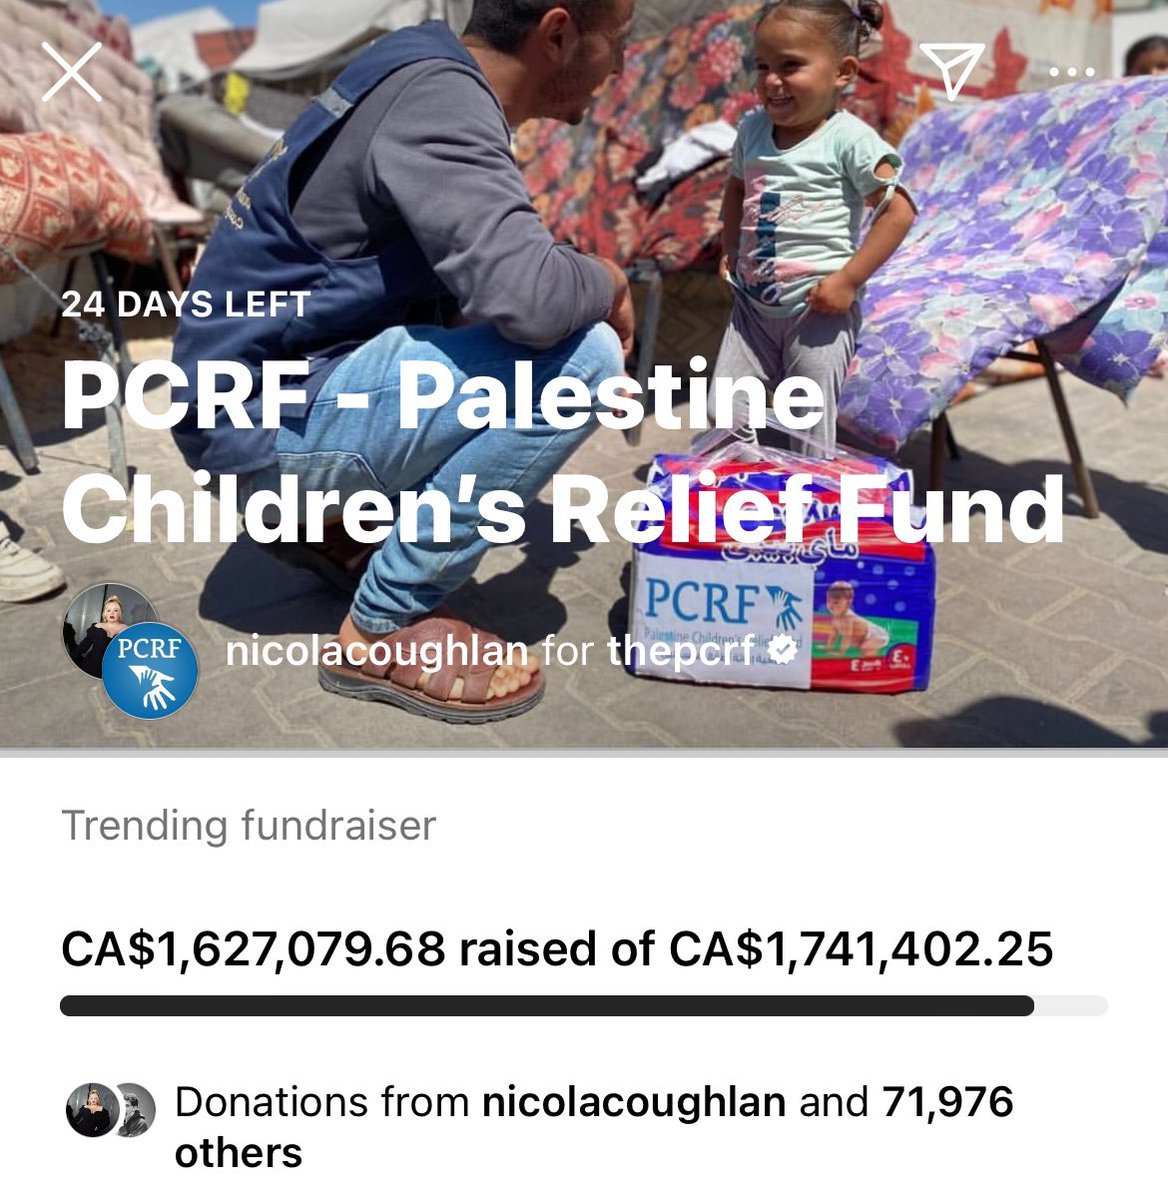 nicola coughlan (who plays penelope in bridgerton) is SO close to reaching her fundraising goal for the palestine children’s relief fund!!! please donate if you can ❤️❤️ instagram.com/stories/nicola…